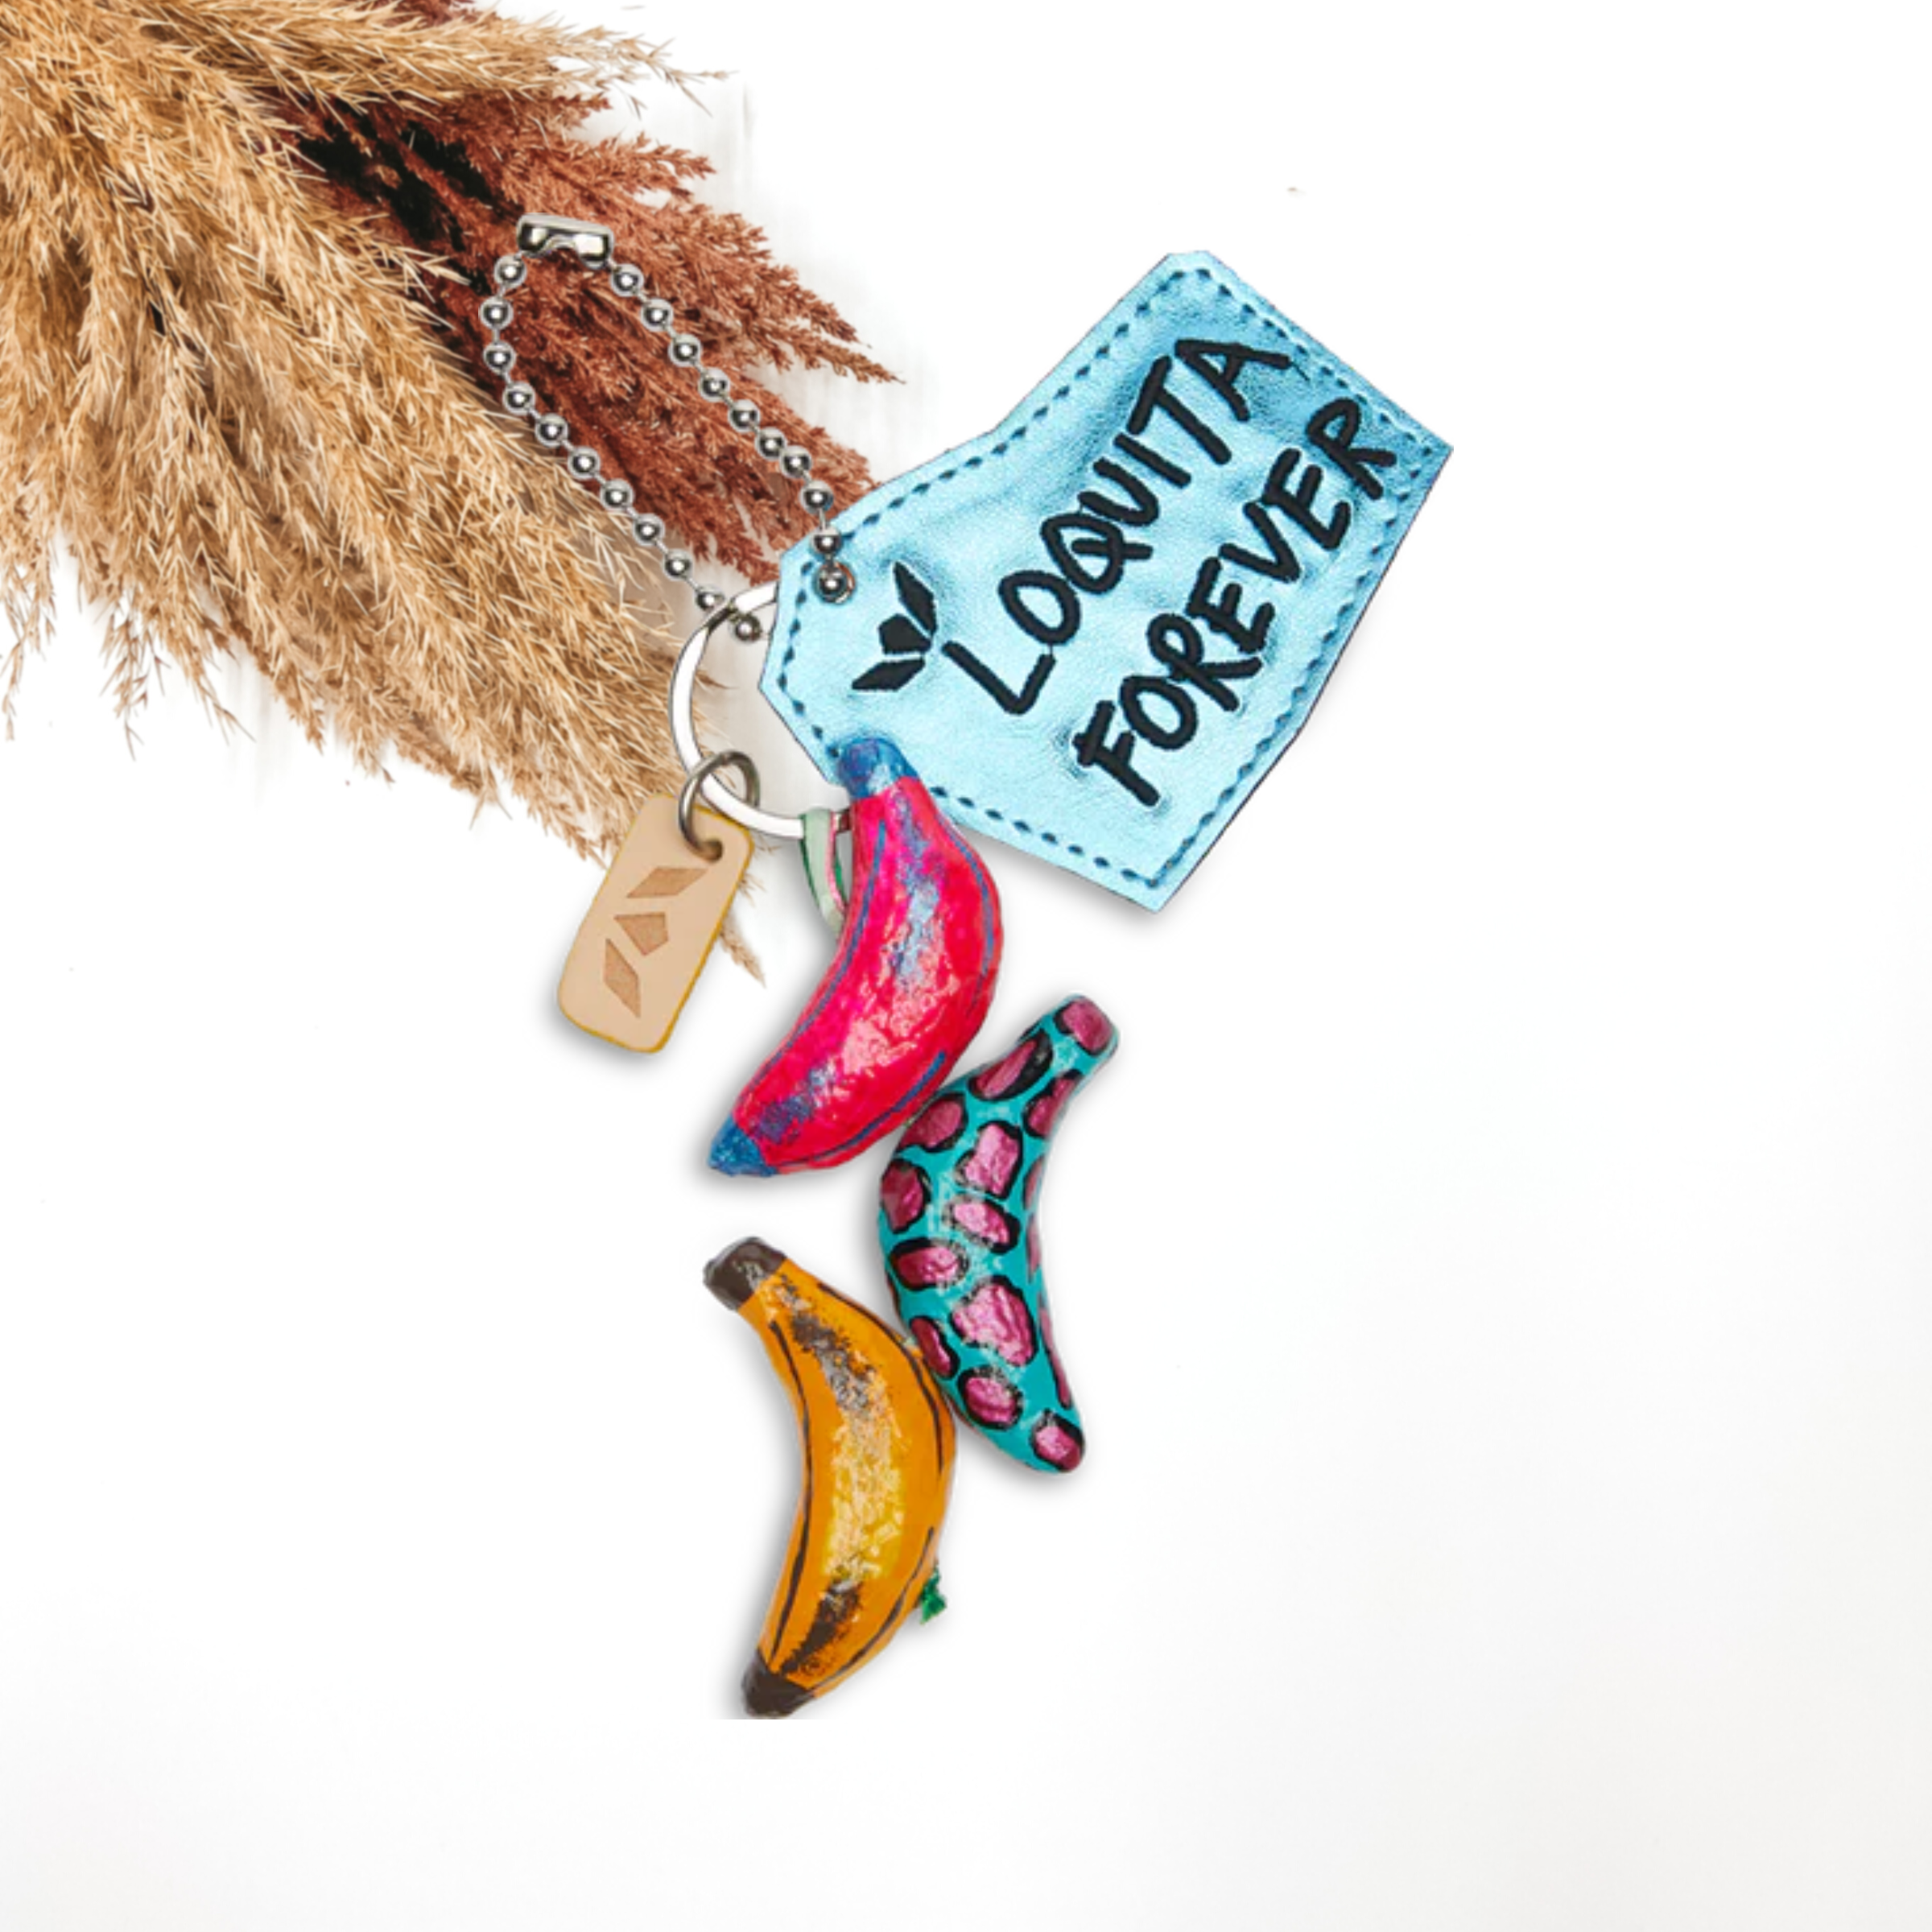 Silver key chain with hanging, colorful bananas and an irregular shaped metallic blue charm. the bananas are multicolored with different designs and the blue charm has the words "LOGUITA FOREVER" stitched in black. This charm is pictured on a white background with pompous grass at the top left corner. 